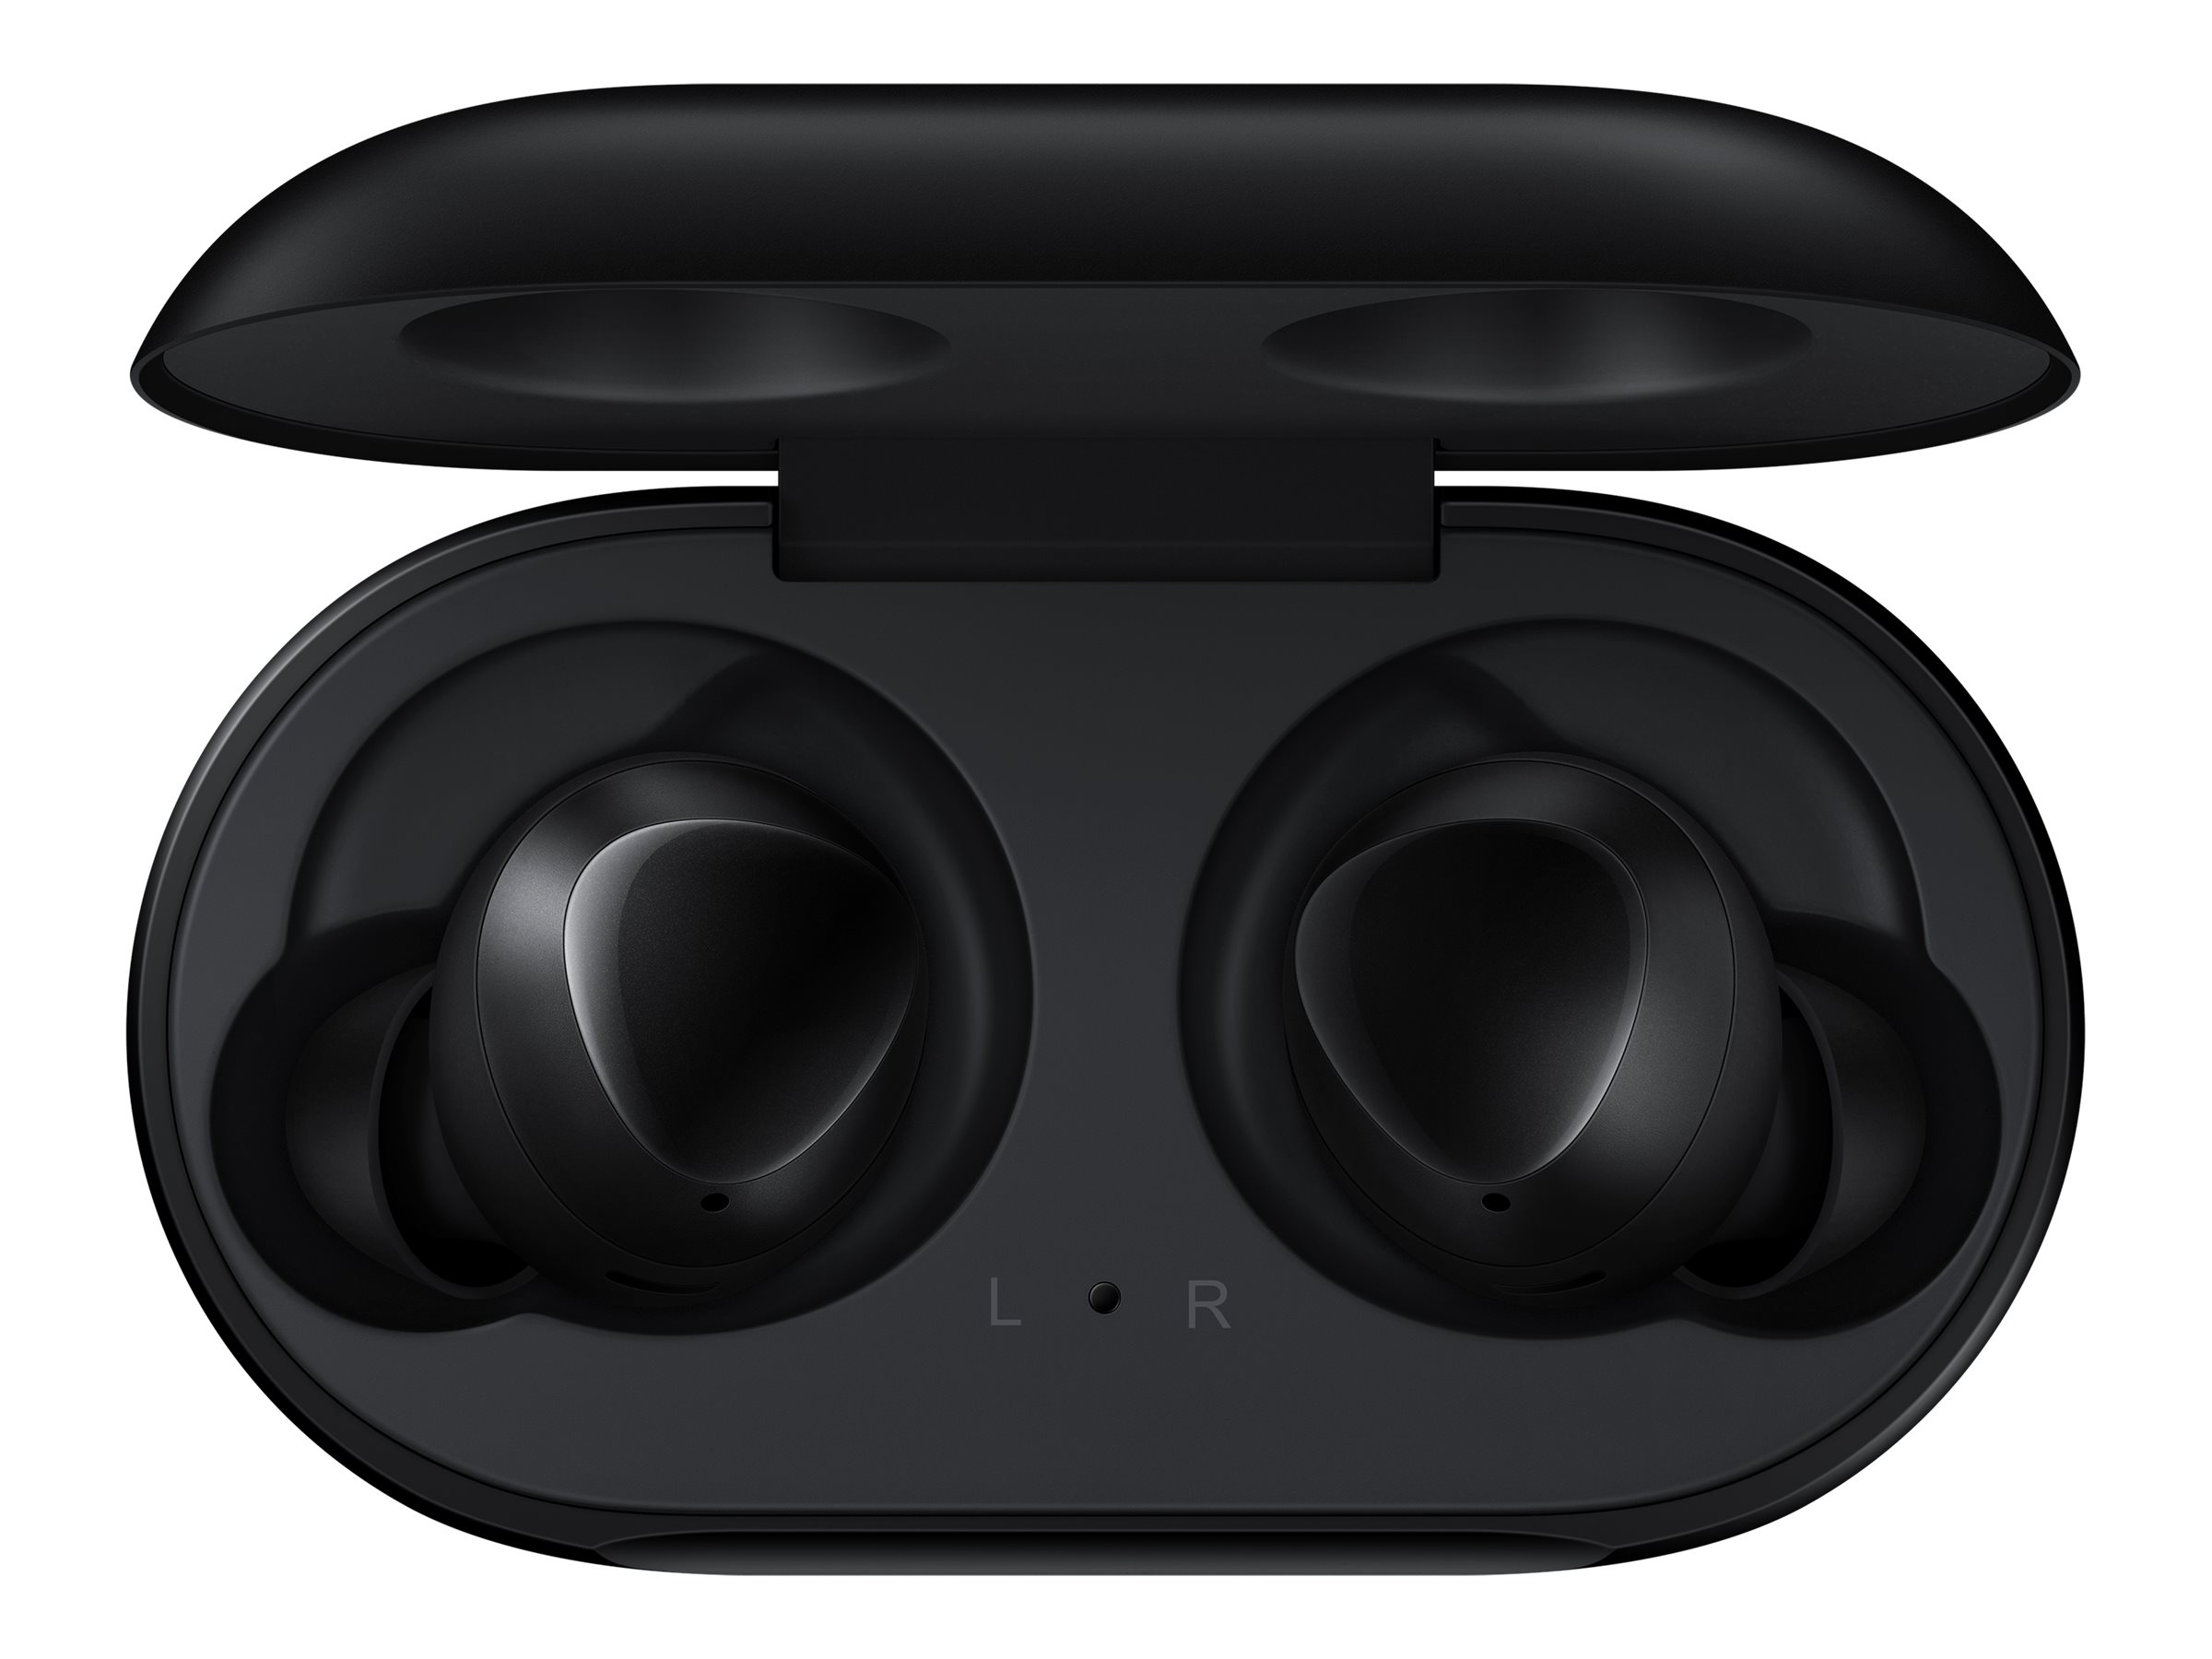 SAMSUNG Galaxy Buds, Black (Charging Case Included) - image 3 of 10